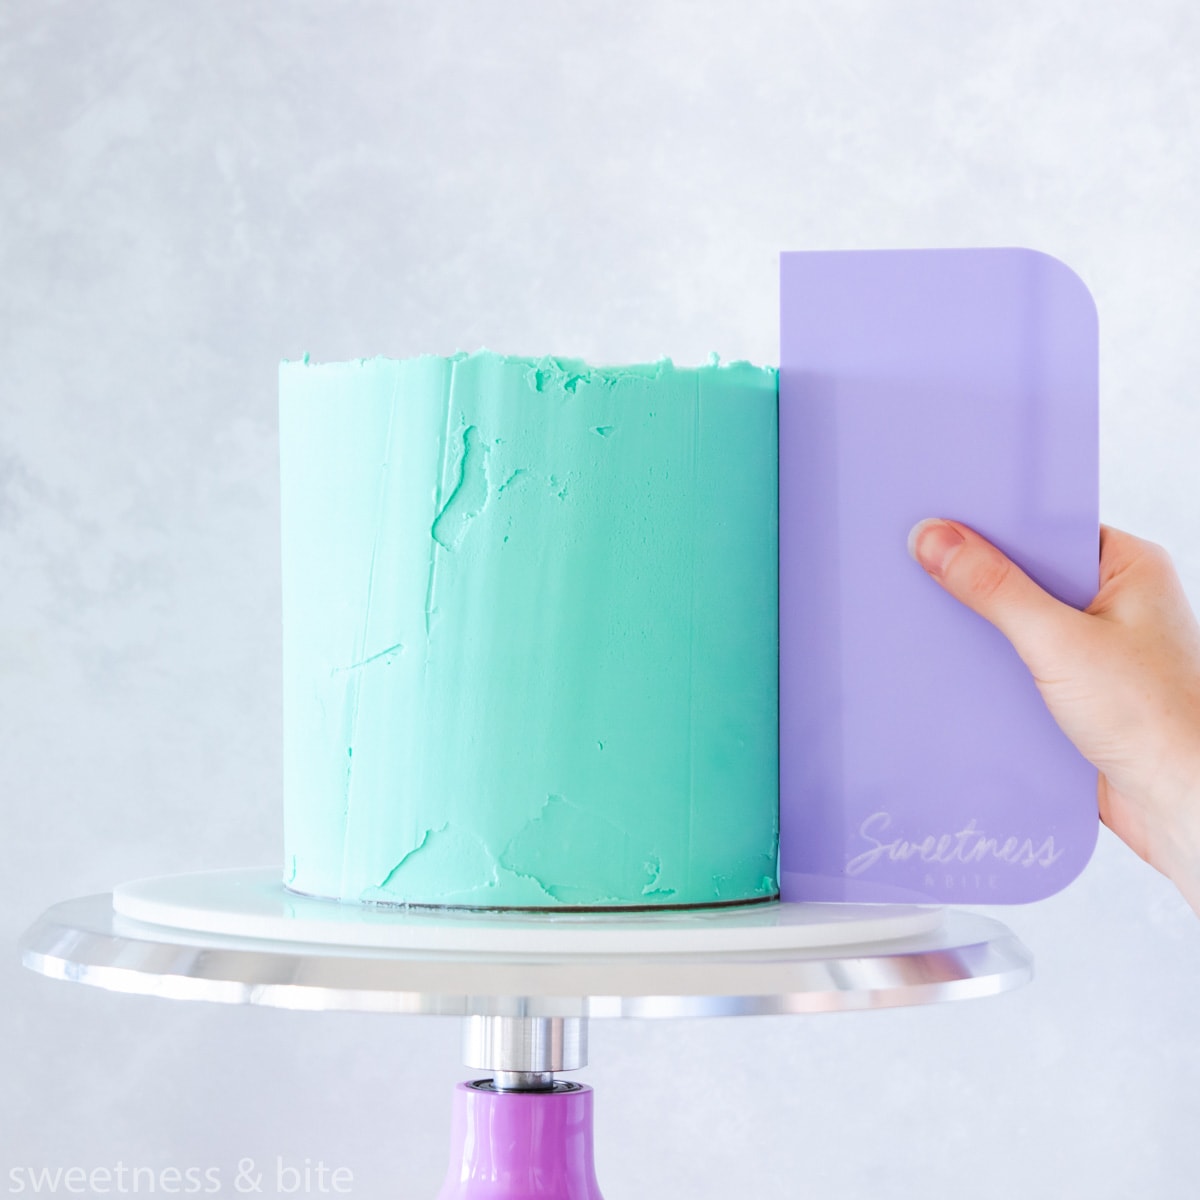 A cake being ganached with teal ganache using a purple scraper